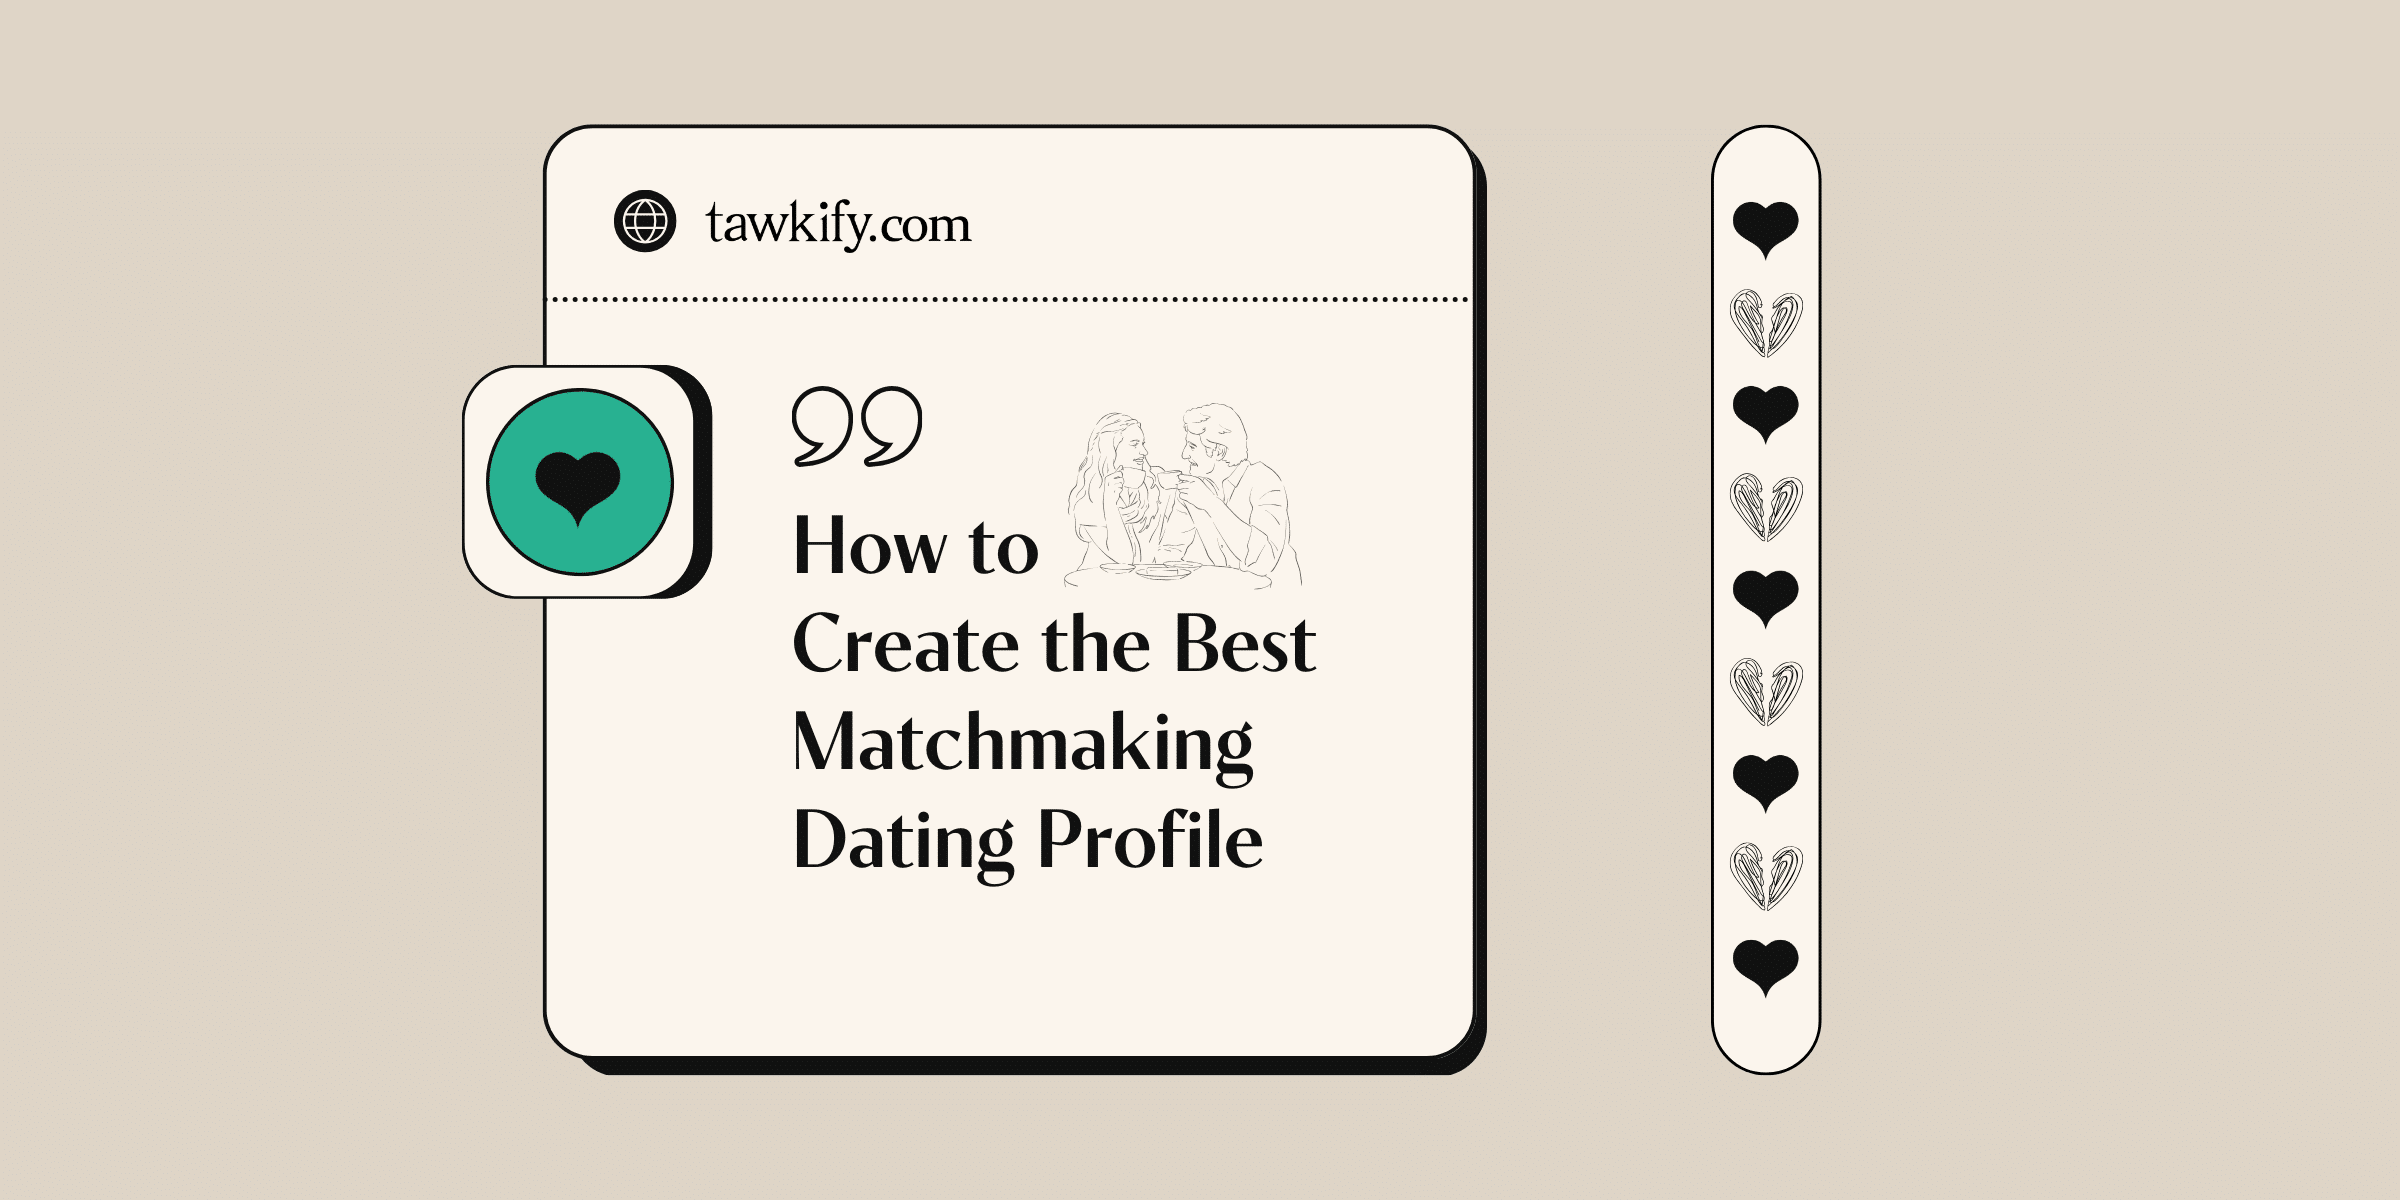 Discover how to create the best matchmaking dating profile and maximize your chances of finding your best match – click here for expert tips!